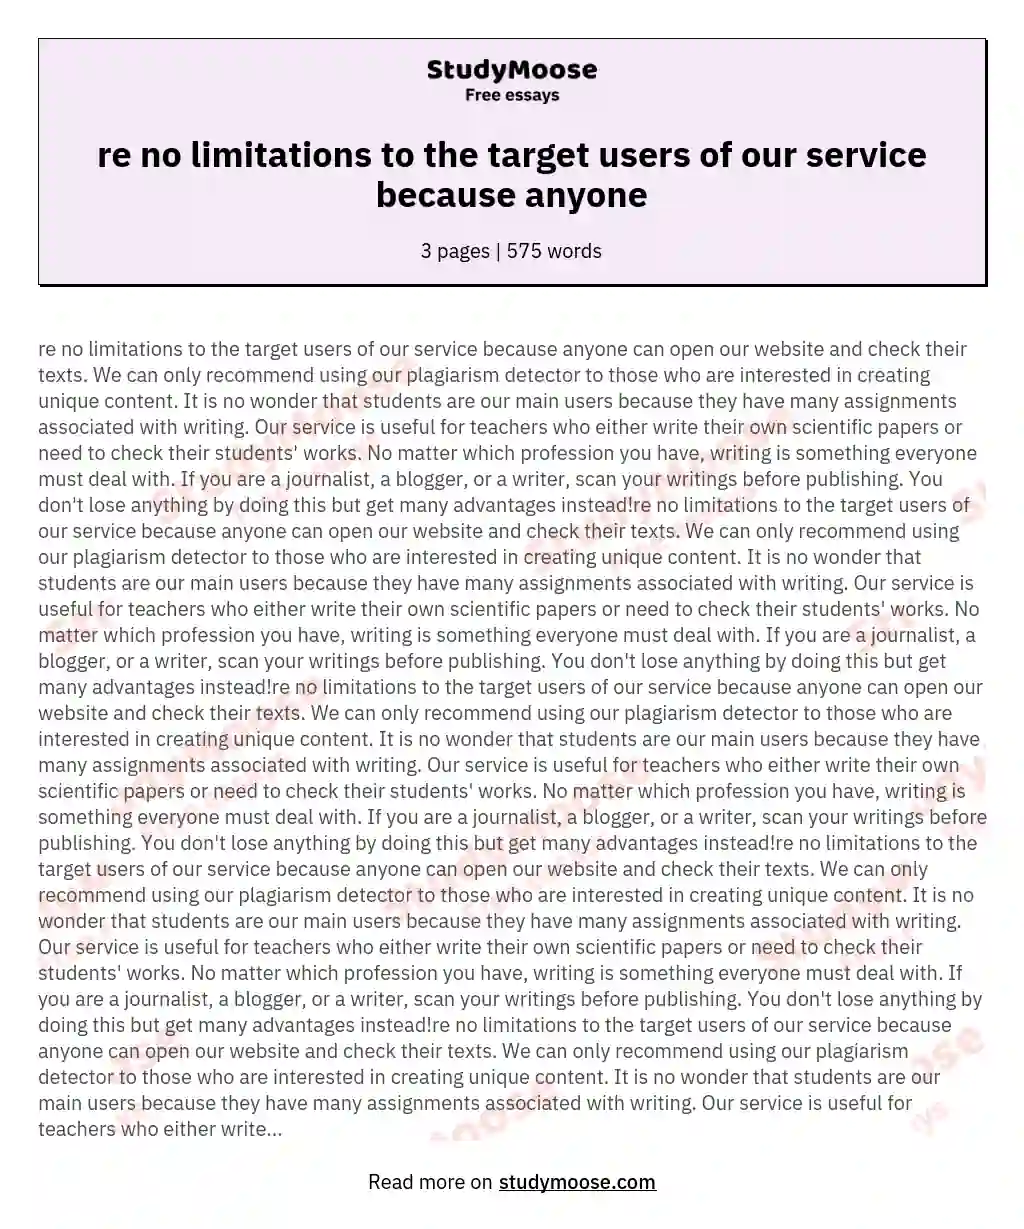 re no limitations to the target users of our service because anyone